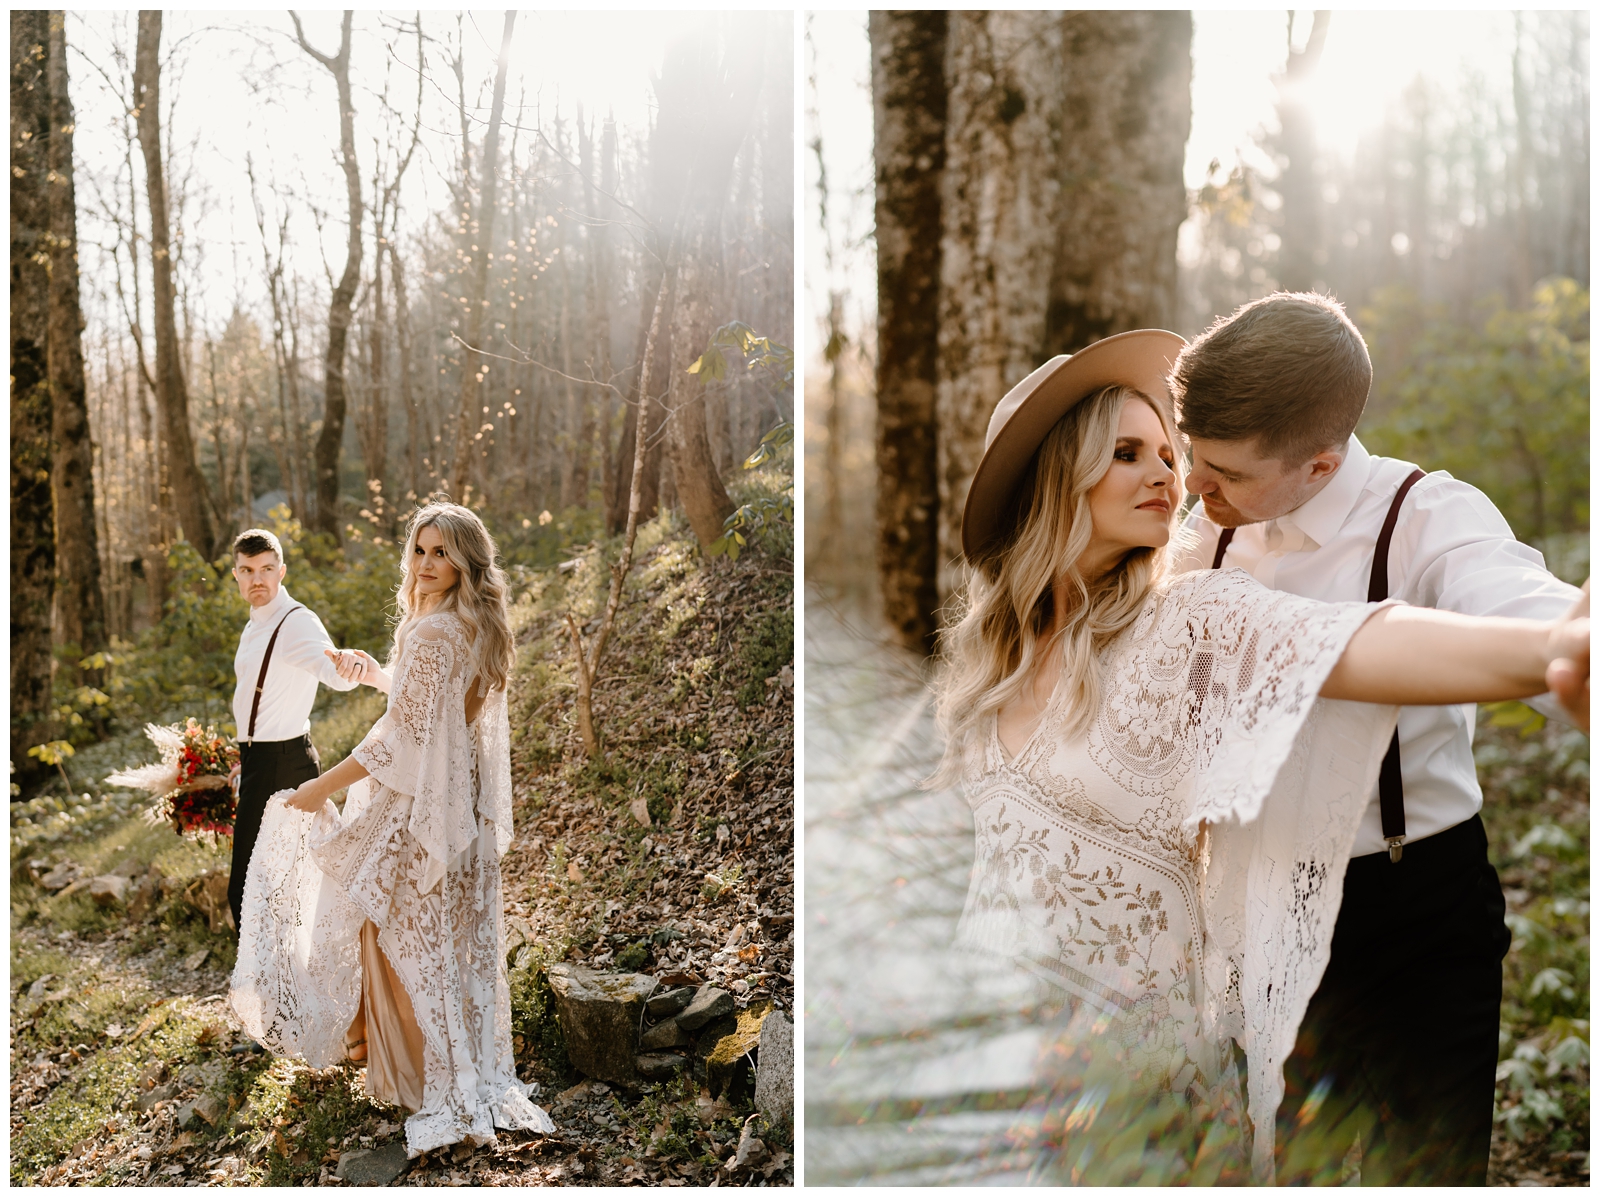 Intimate elopement with boho vibes in Boone, NC